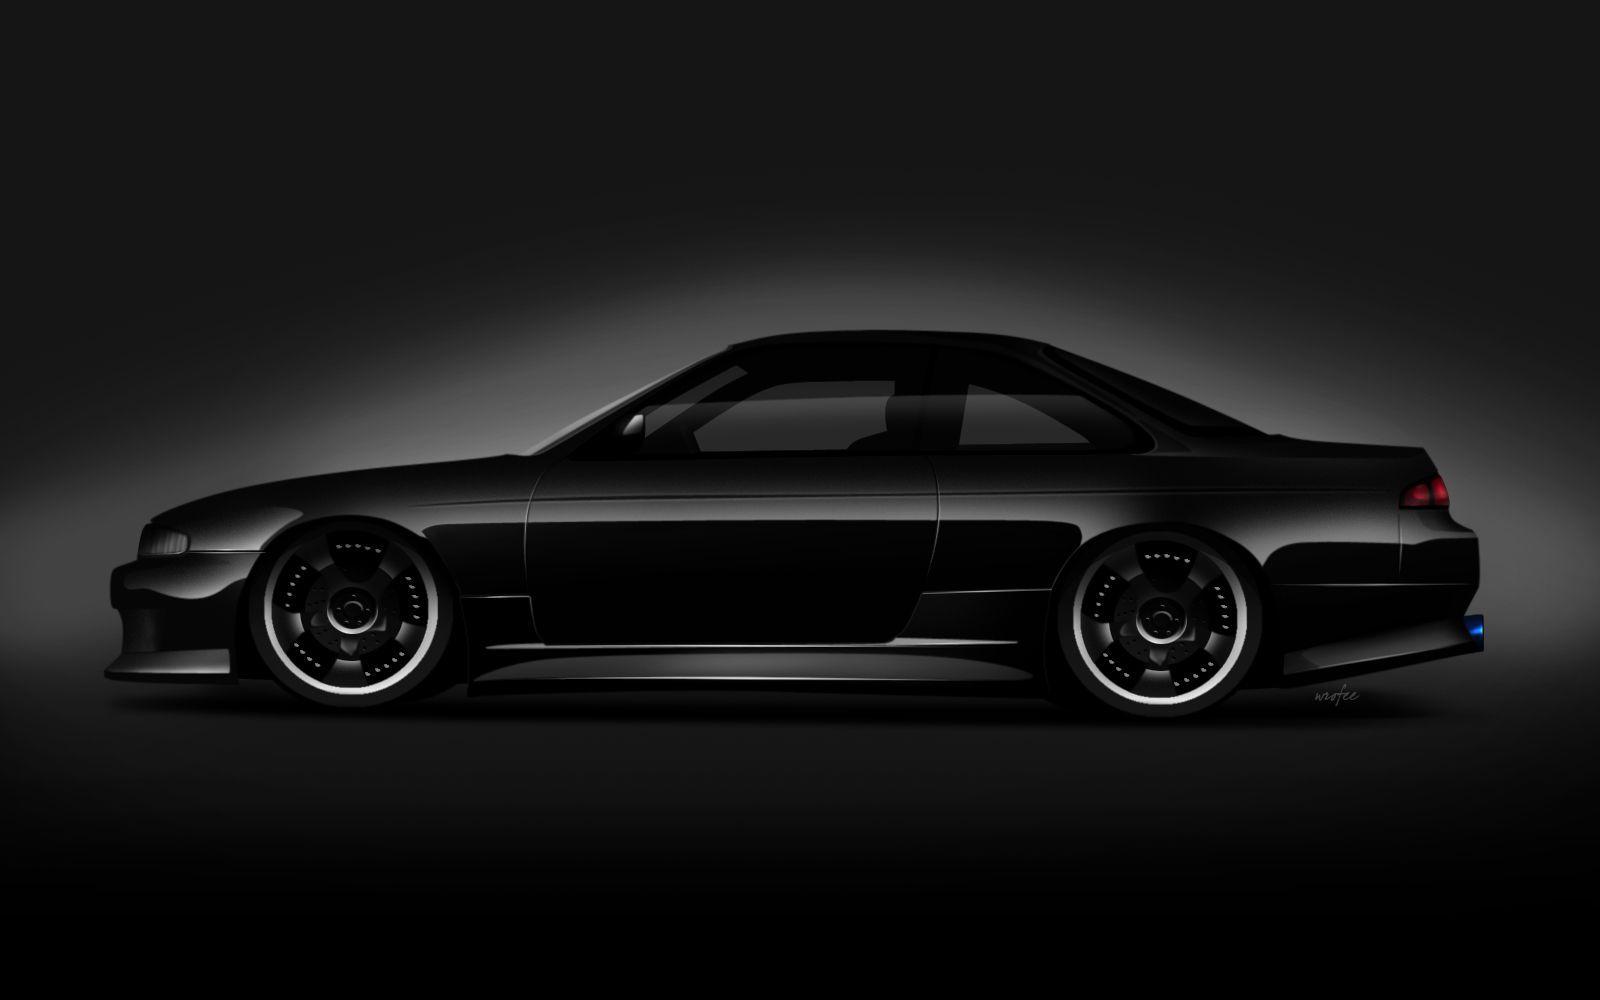 Nissan S14 Wallpapers - Wallpaper Cave